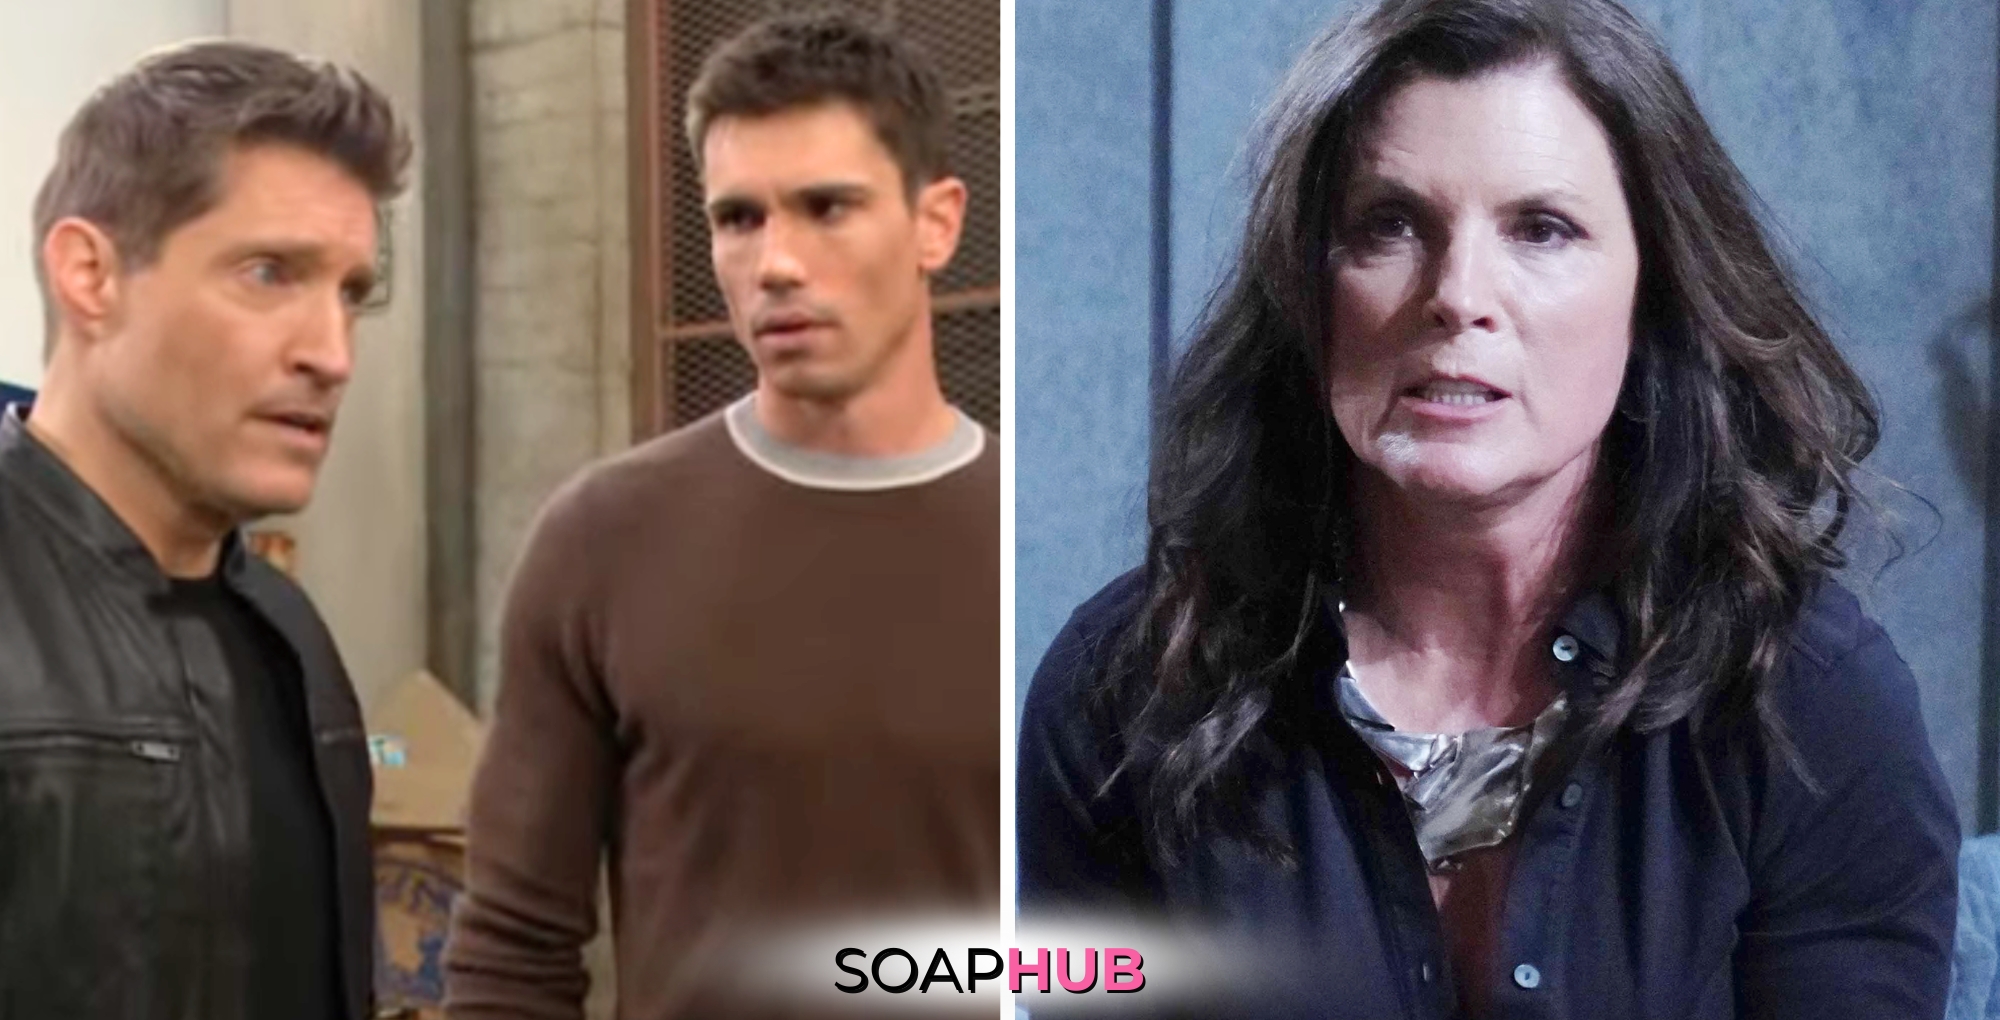 Bold and the Beautiful Spoilers for Thursday, May 2, Episode 9263 Feature Deacon, Finn and Sheila with the Soap Hub Logo Across the Bottom.